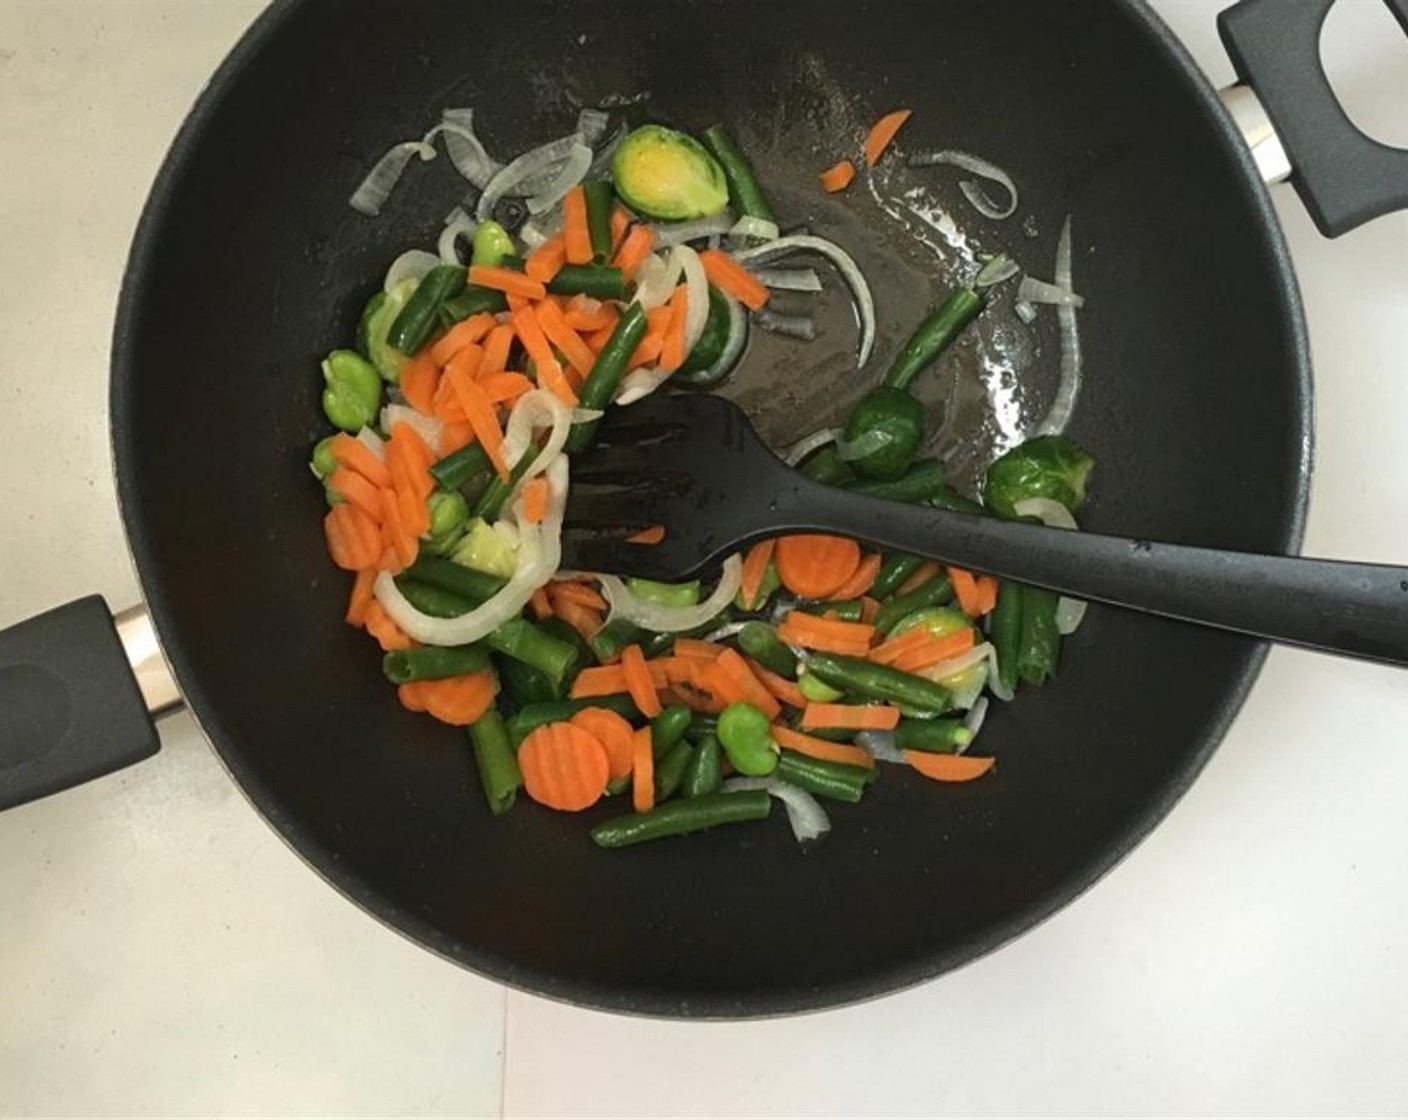 step 2 Add Green Beans (1/2 cup) and Carrot (1/3 cup) to the pan. Stir well. Let the vegetables fry for 3 more minutes. Don’t burn them.